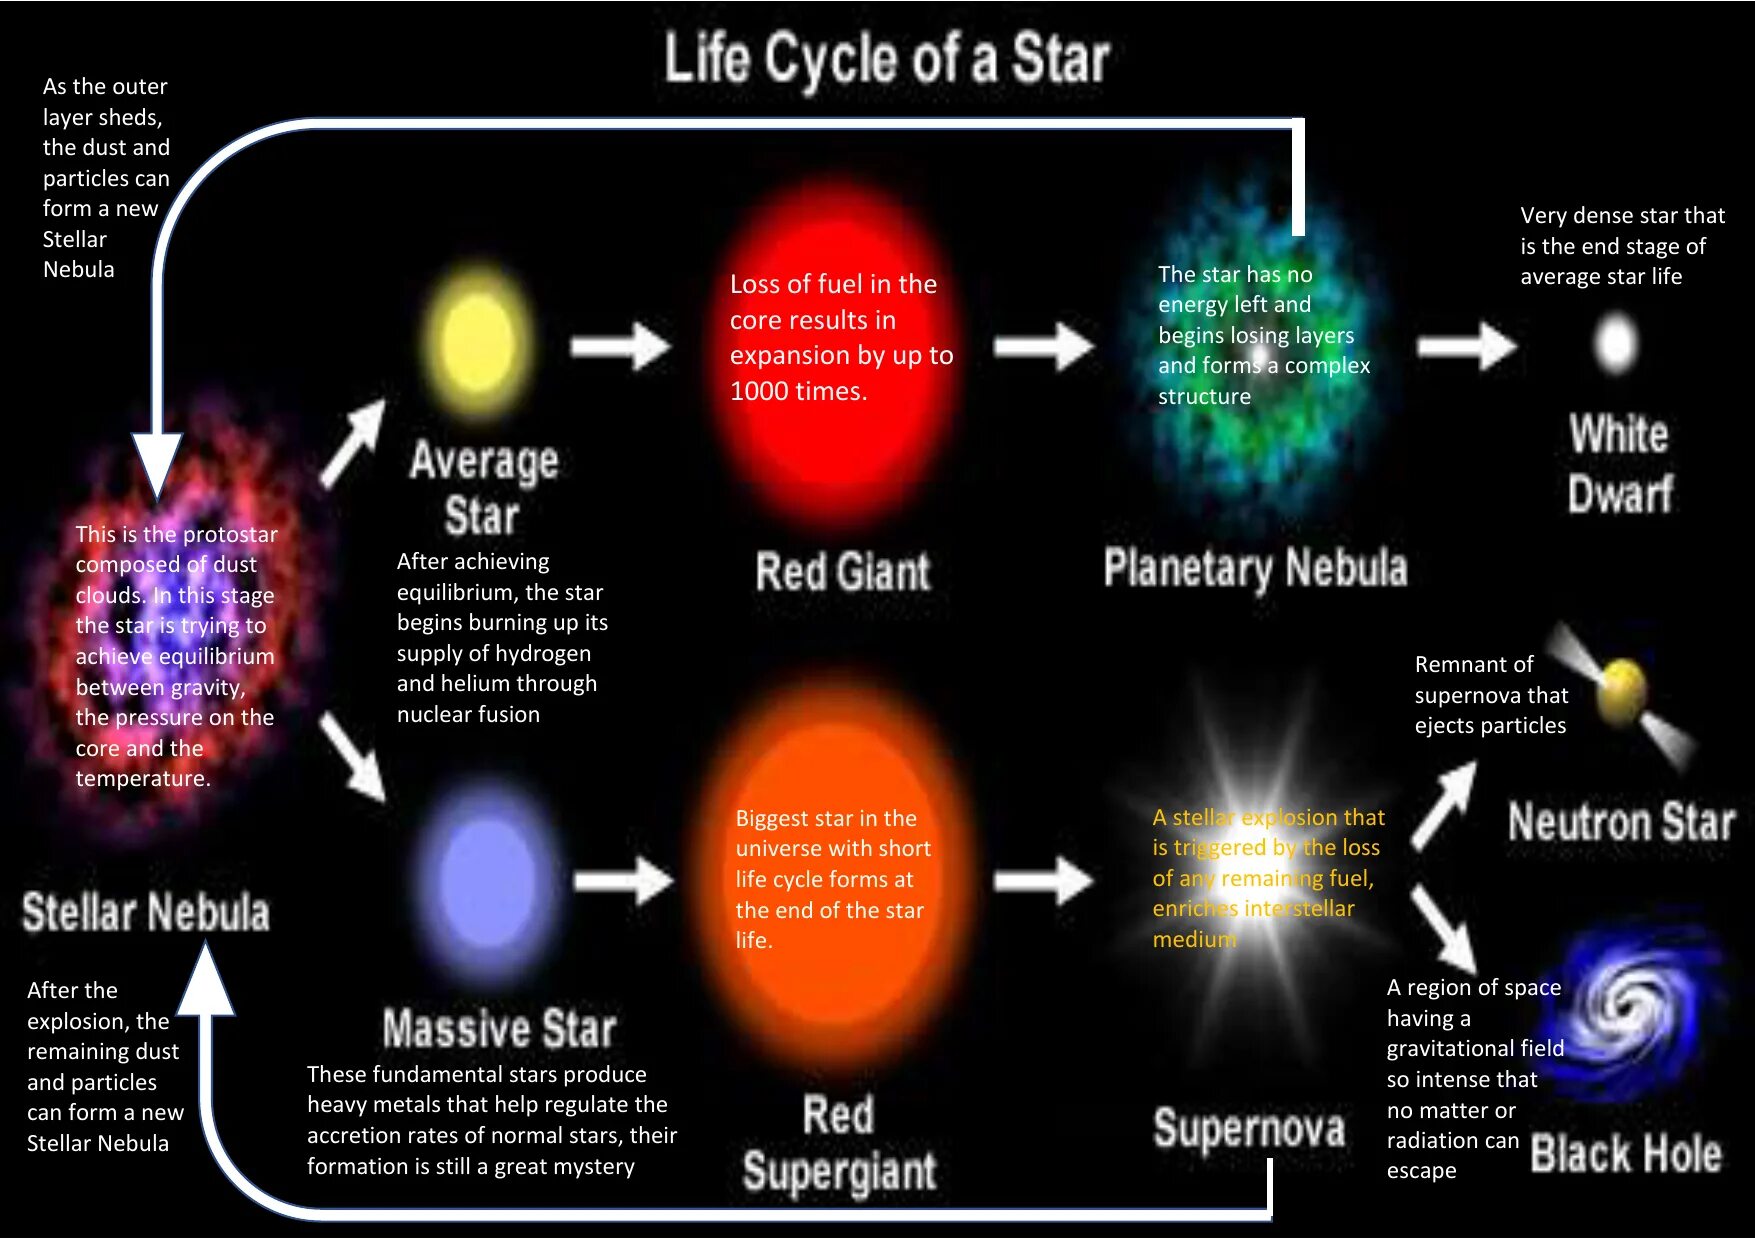 Physical life. Star of Life. Star Lifecycle. Stellar Lifecycle. Cycle Star Life Art.